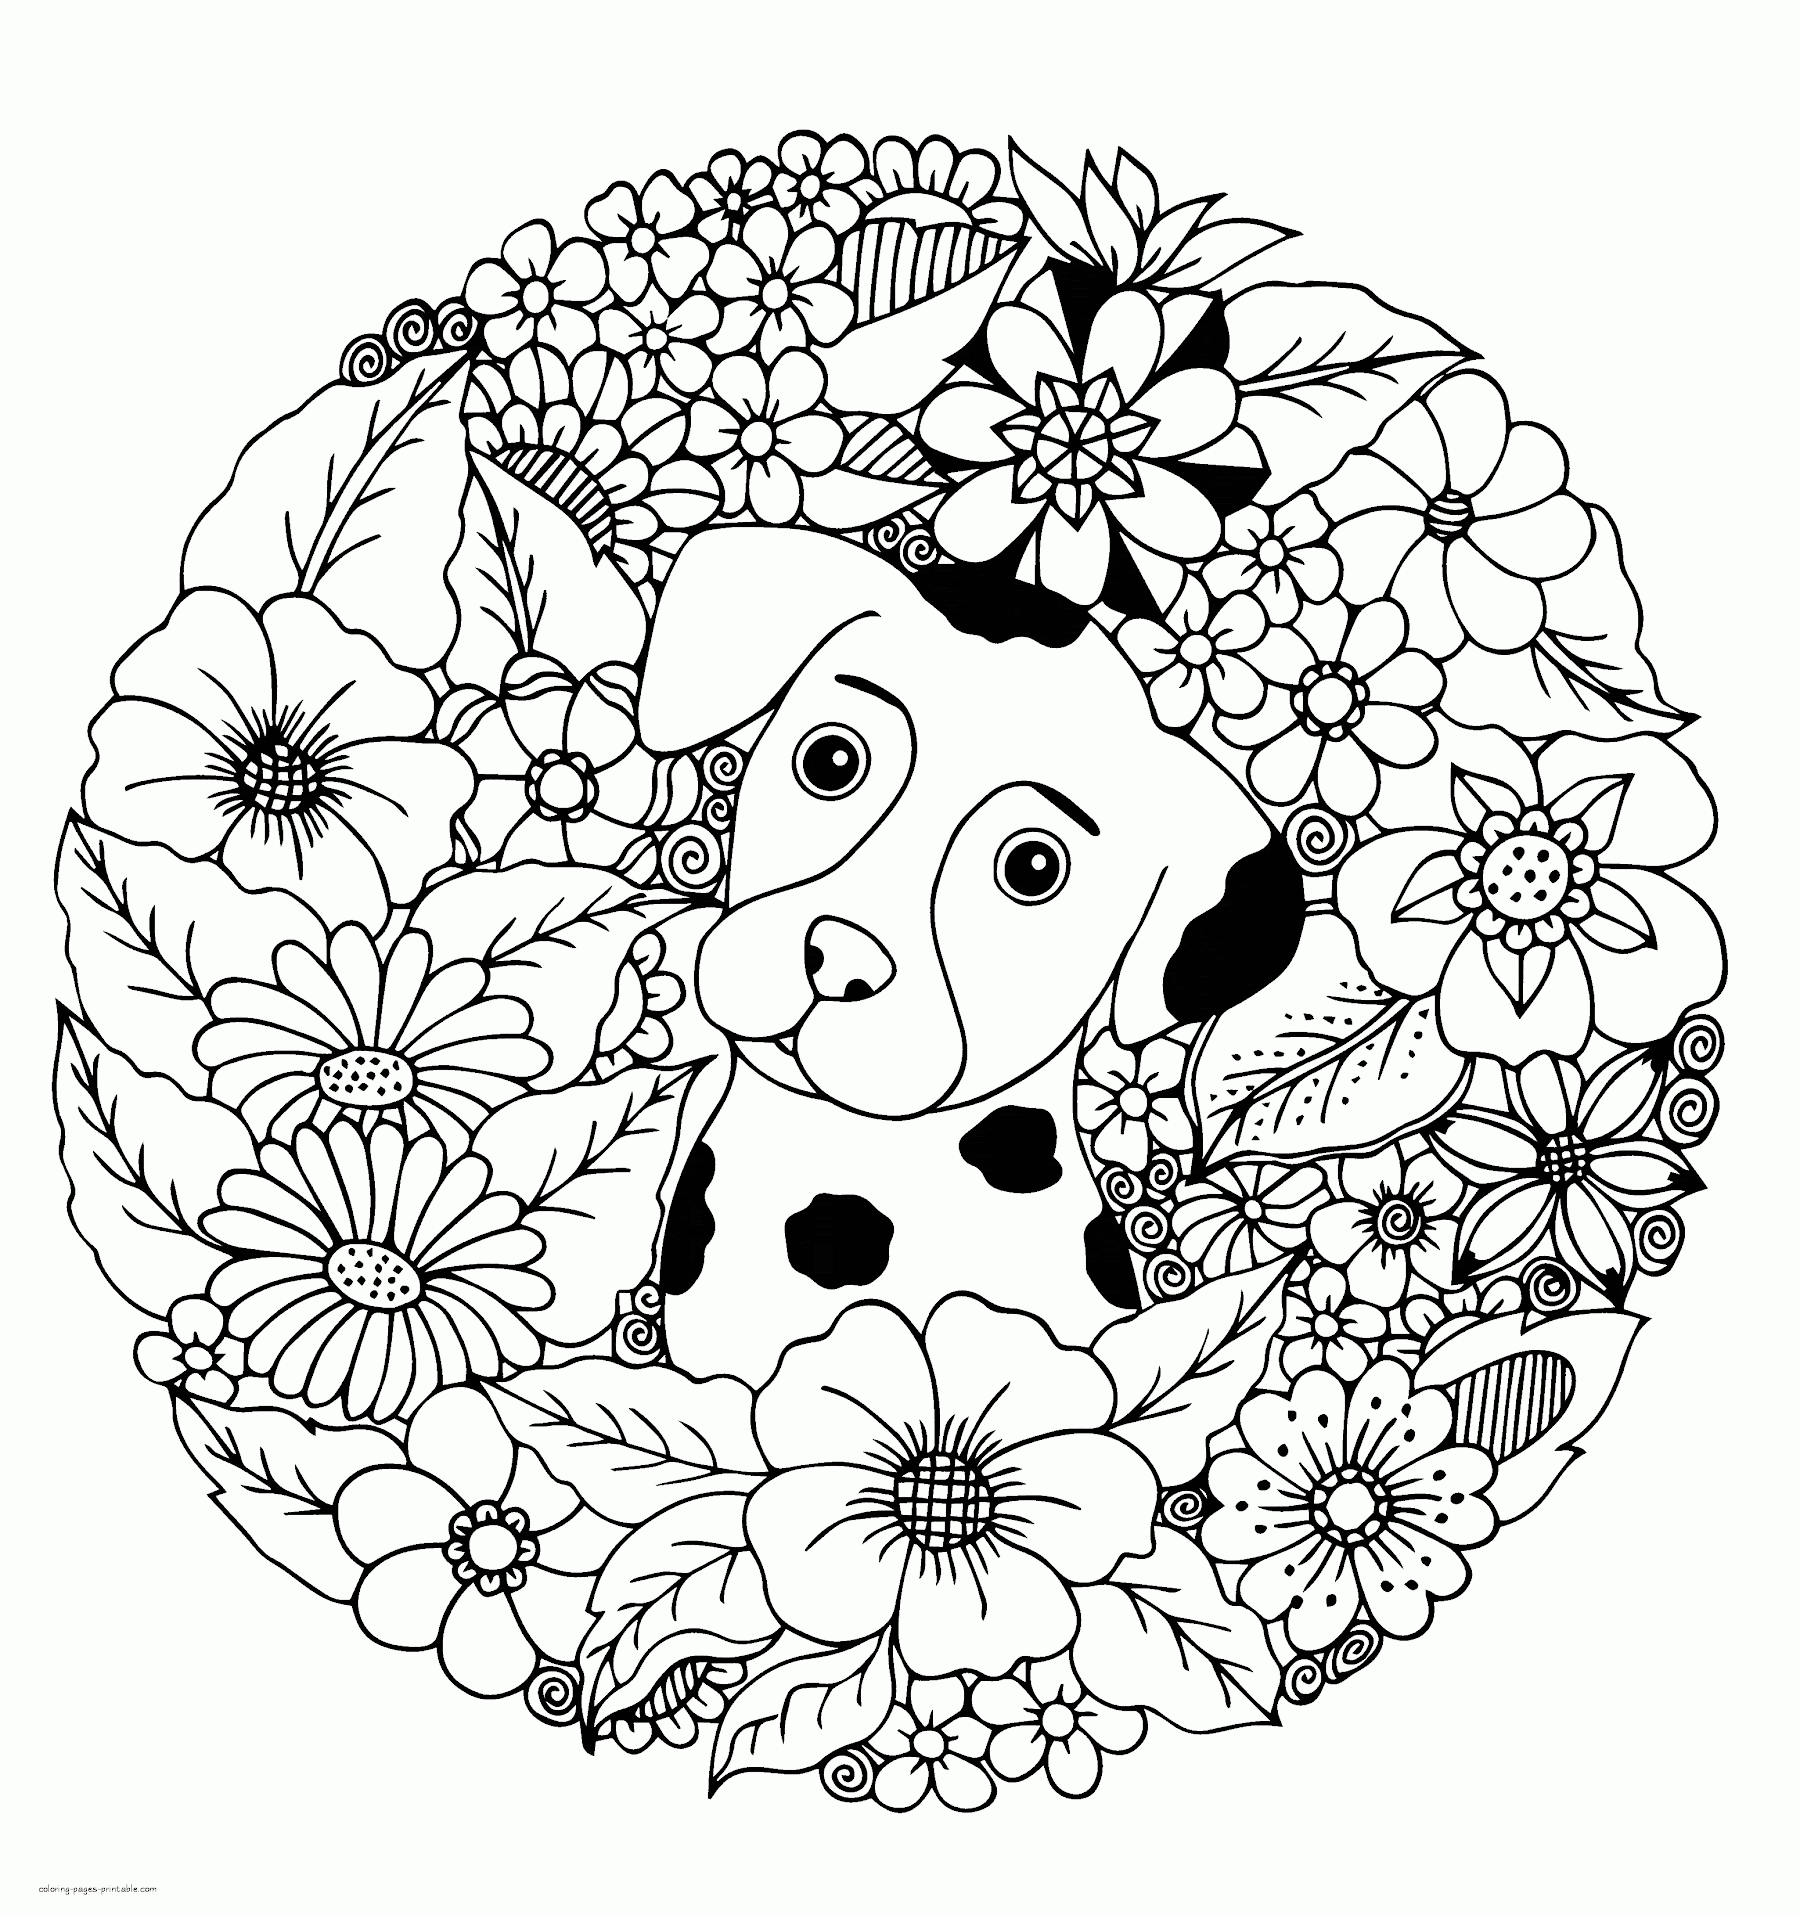 Baby Animal Coloring Pages To Print - 322+ Best Free SVG File